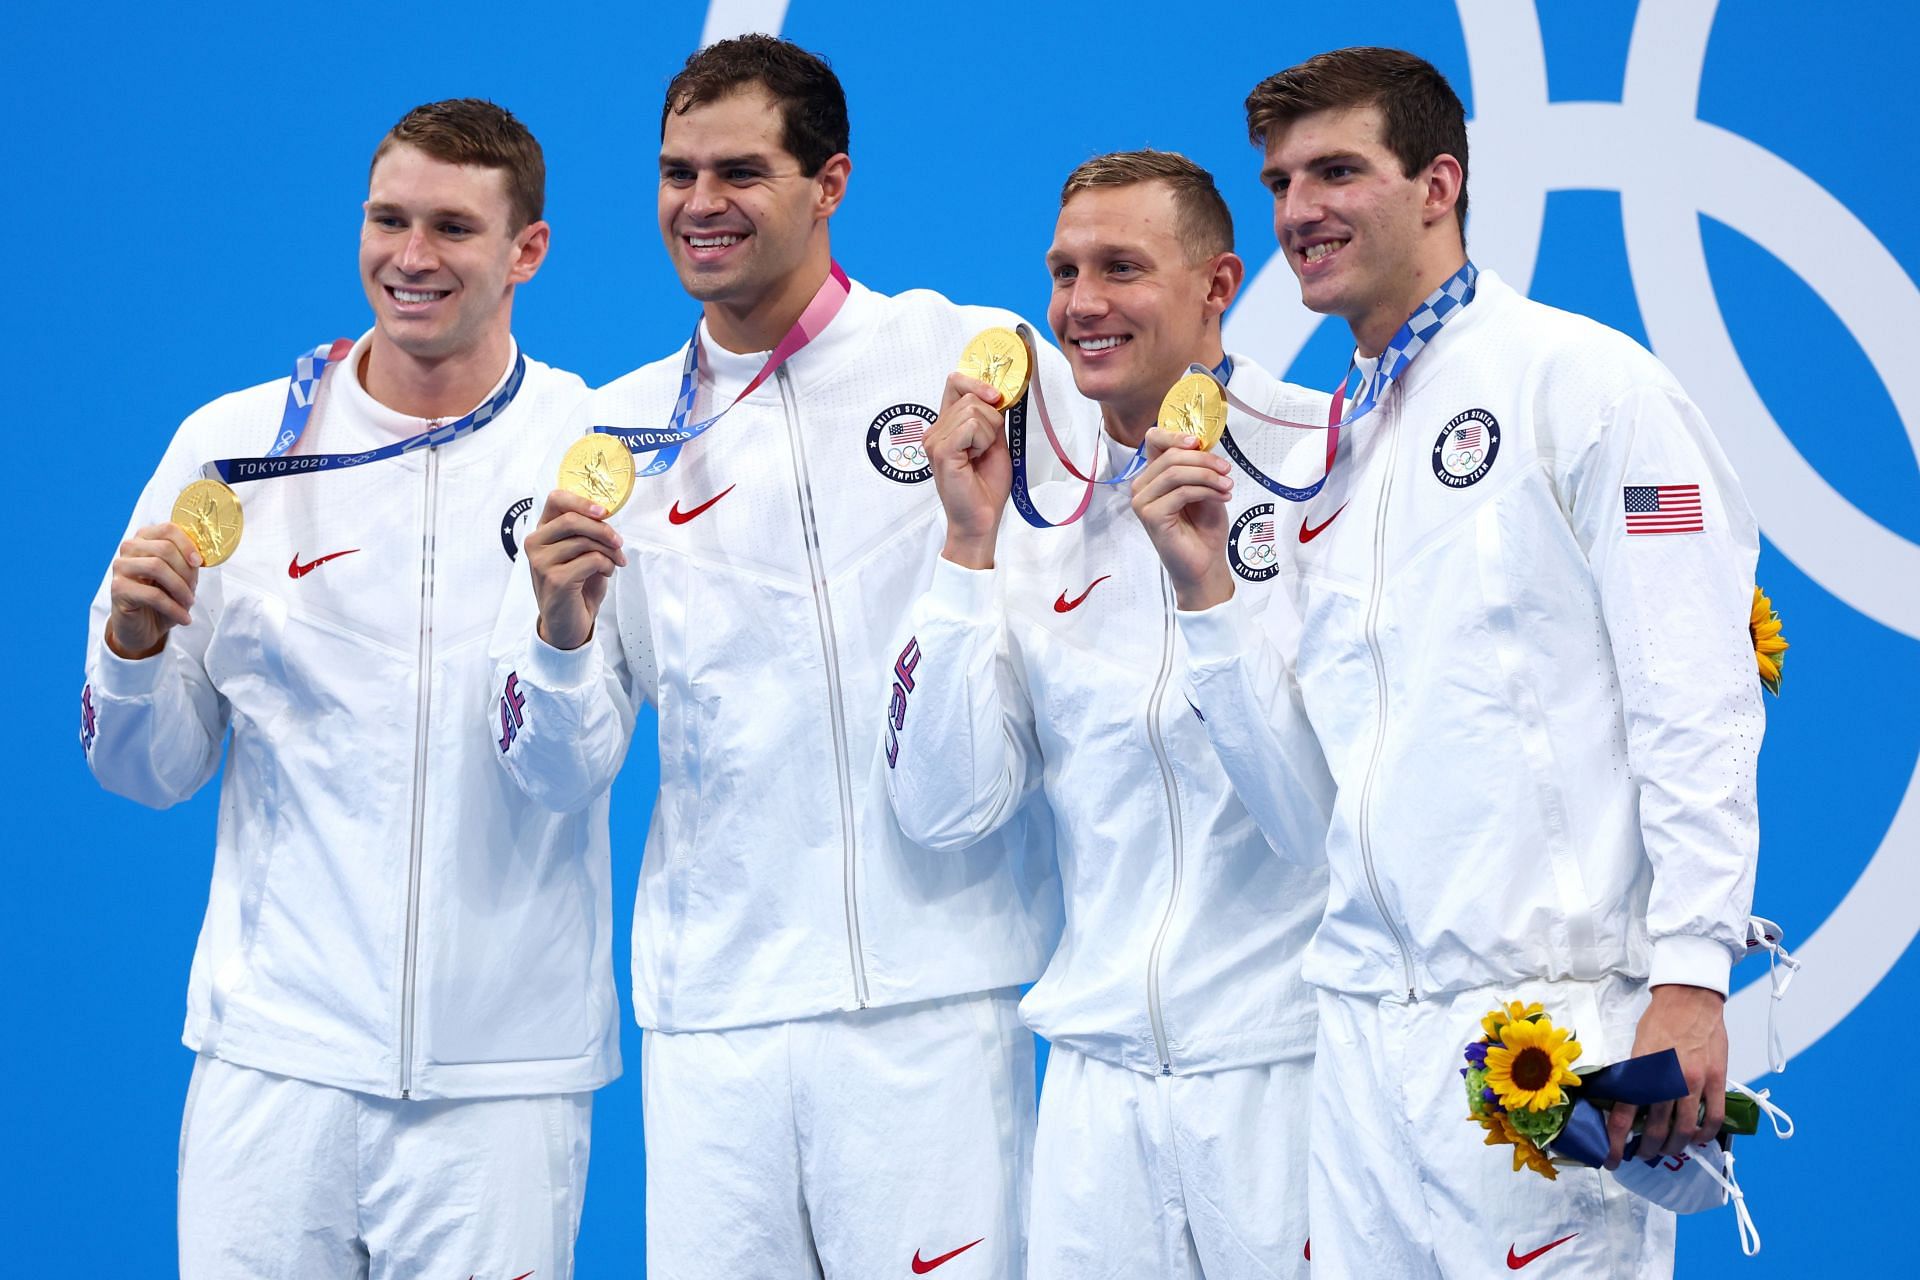 Ryan Murphy, Michael Andrew, Caeleb Dressel and Zach Apple of Team United States pose on the podium during the medal ceremony for the Men&#039;s 4 x 100m Medley Relay Final (Image via Maddie Meyer/Getty Images)